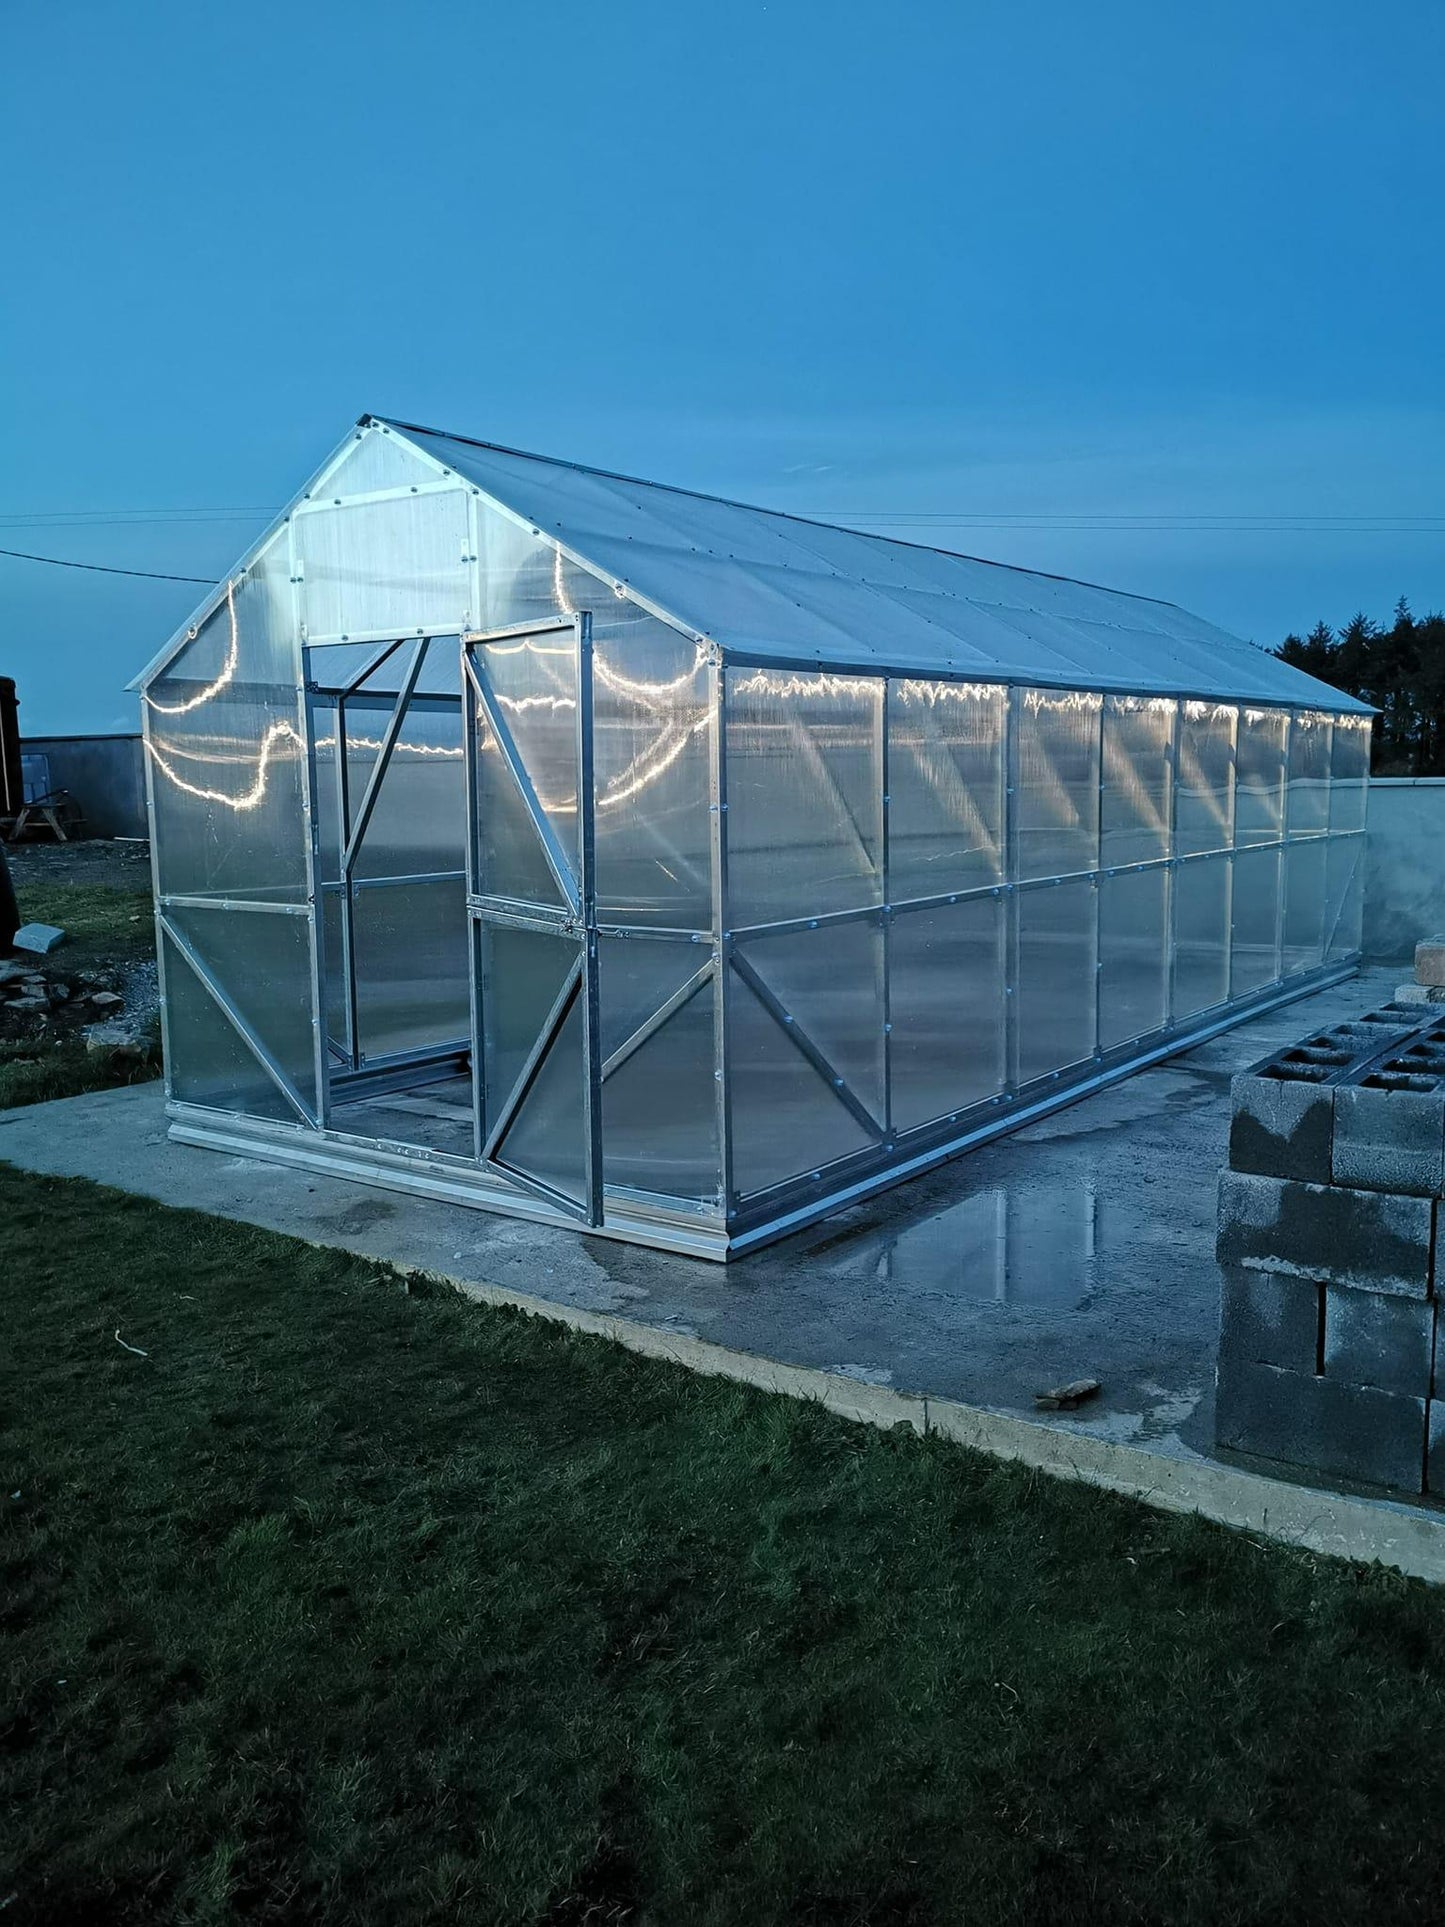 THE VICTORIA - POLYCARBONATE GREENHOUSE 3X8M (9.8FT X 26FT) 24 M² - Keane Gardens